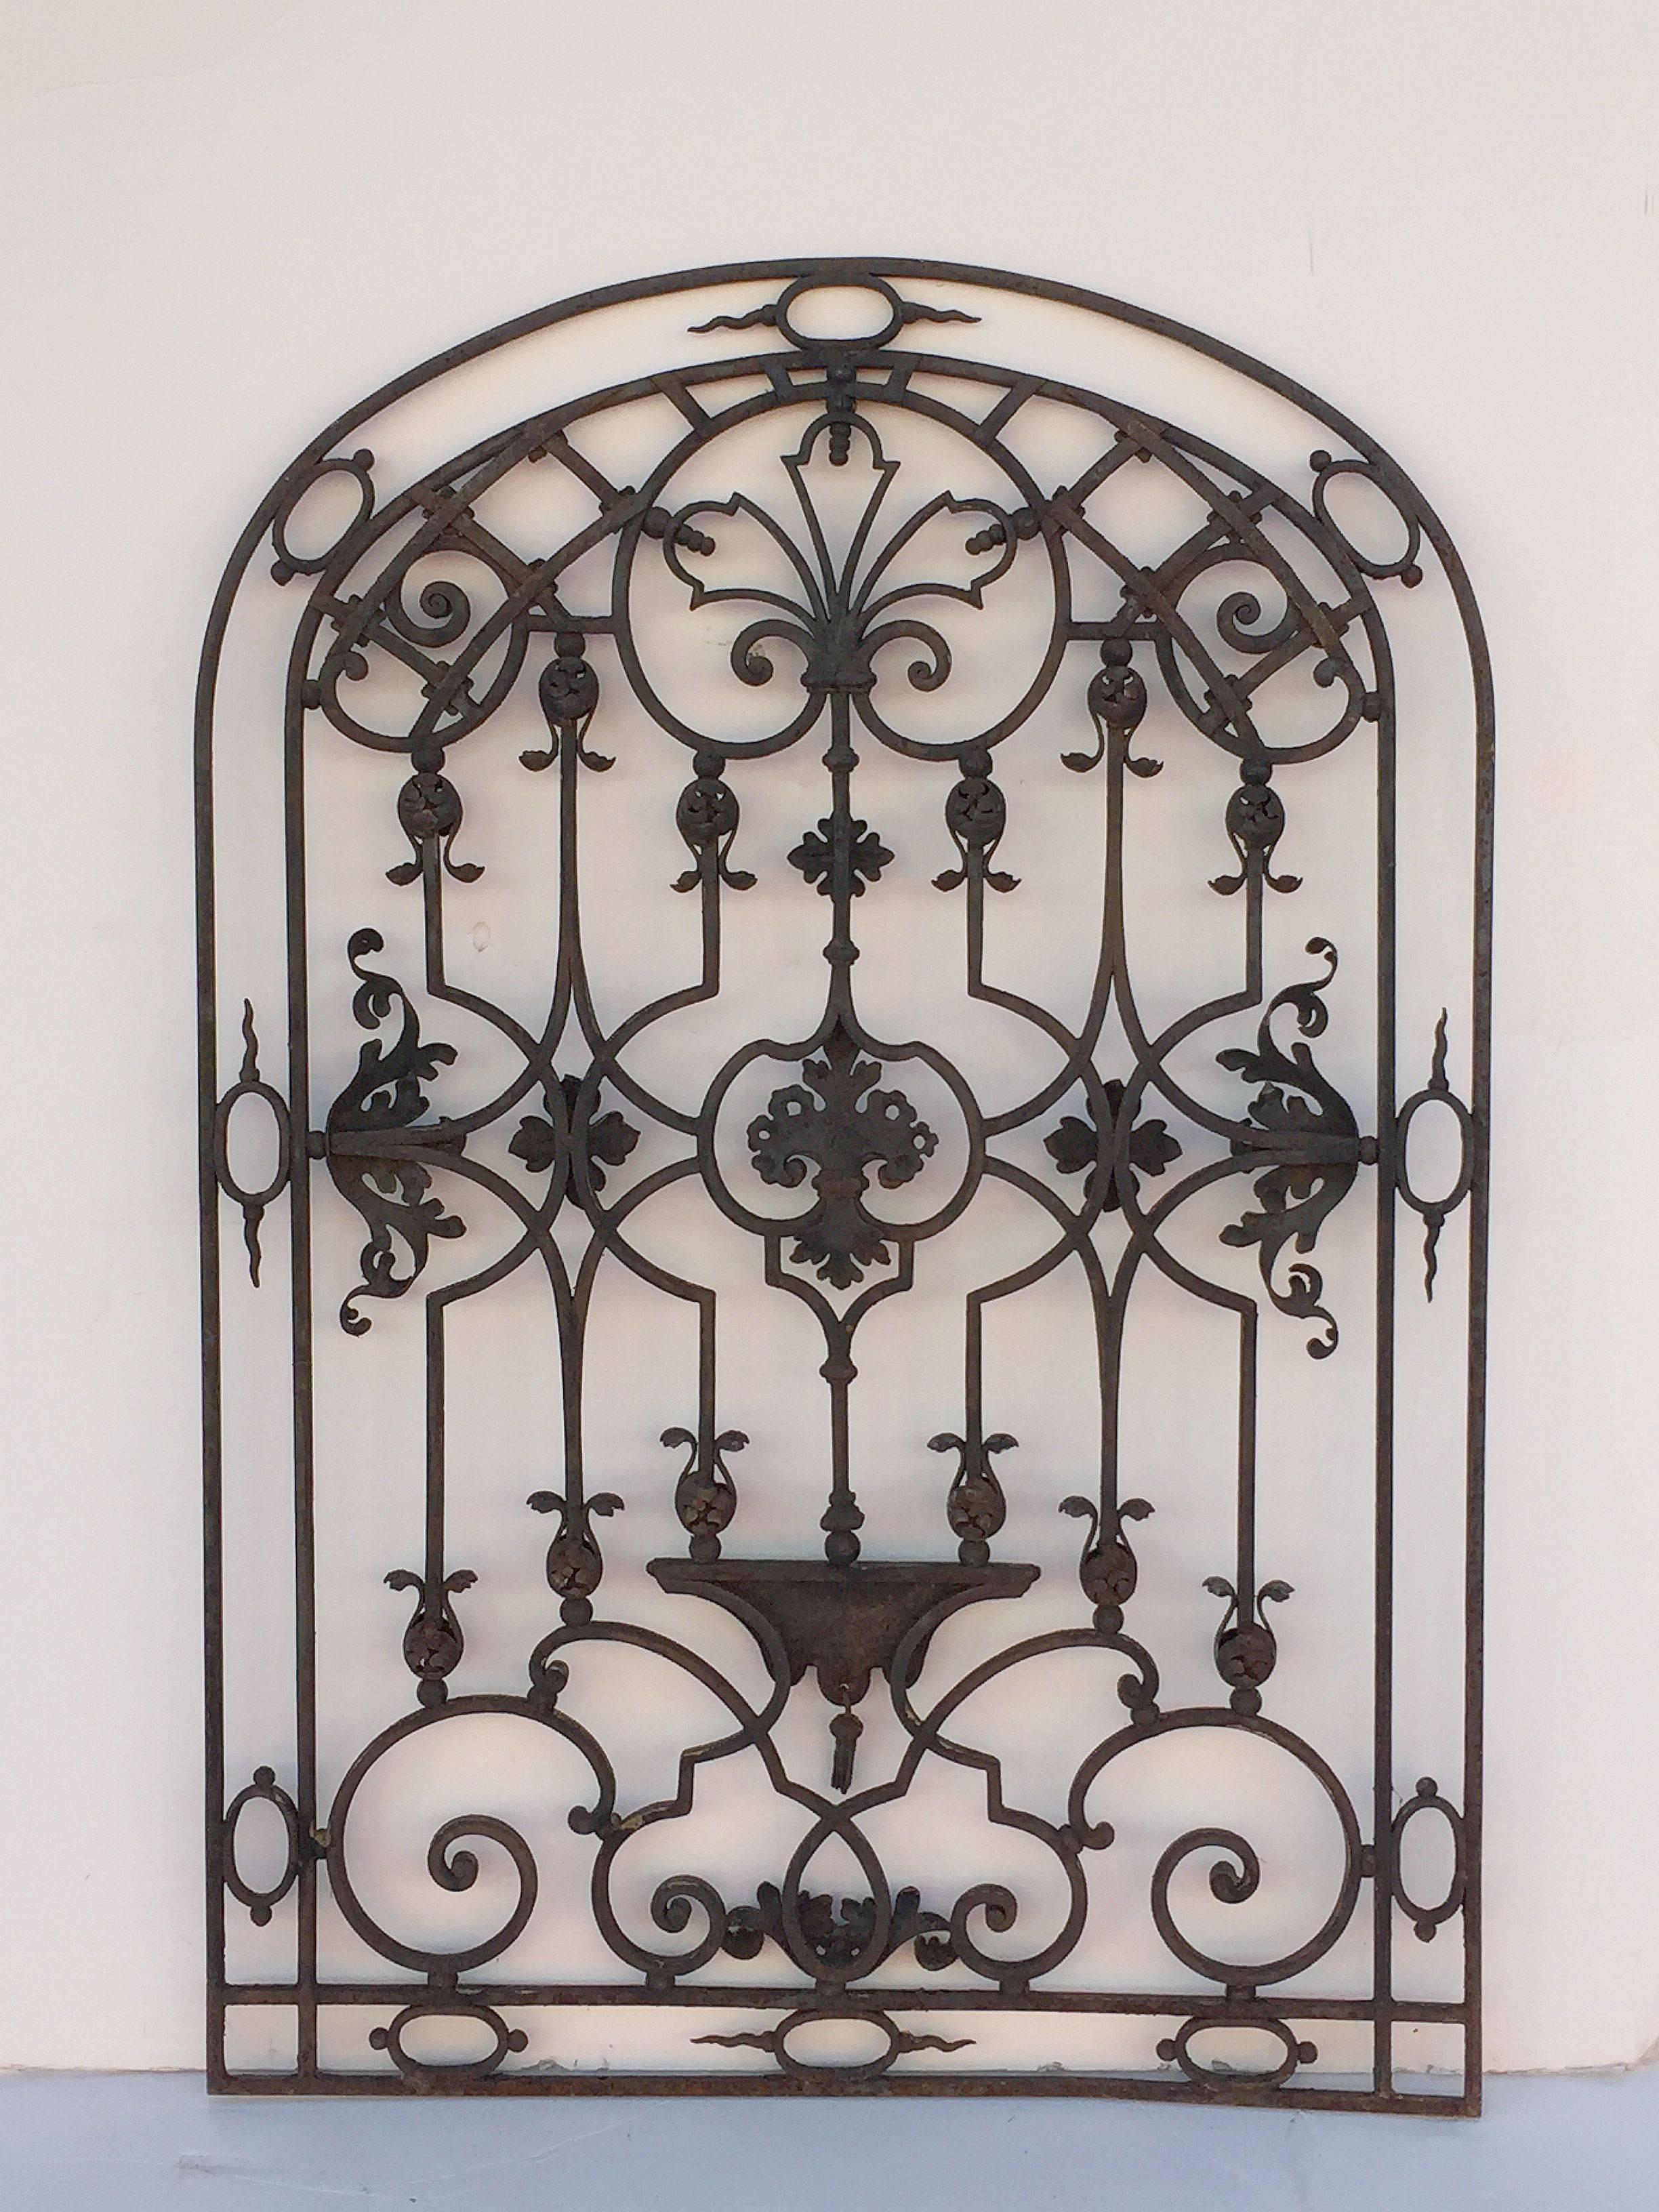 A handsome large French arched gate of wrought iron from the 19th century, featuring a fine design of scroll work and decorative embellishments.

Perfect for a garden room or conservatory or for use as a trellis or architectural feature.